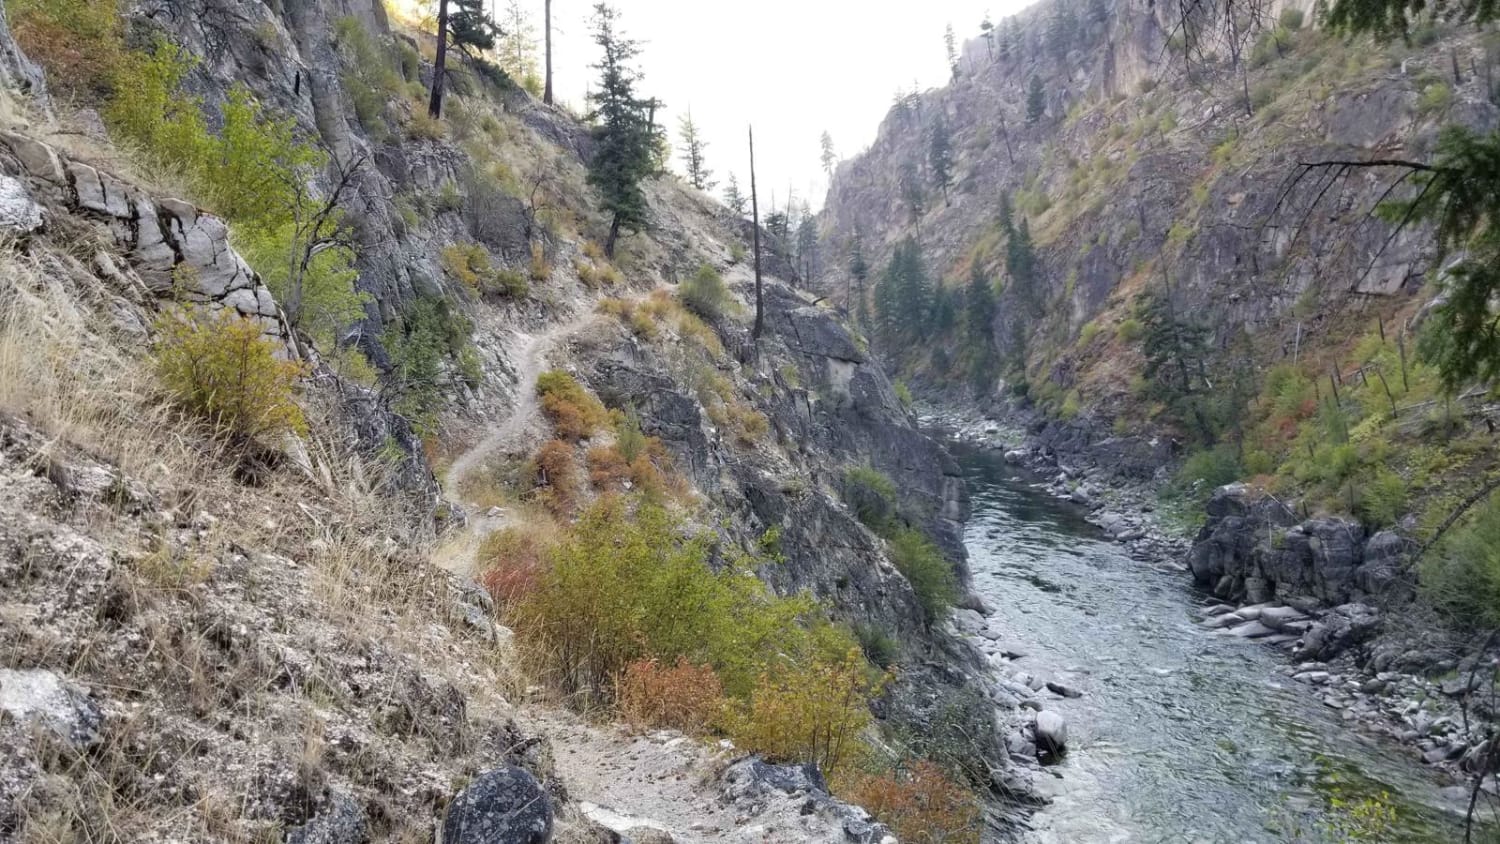 South Fork of the Salmon River Trail